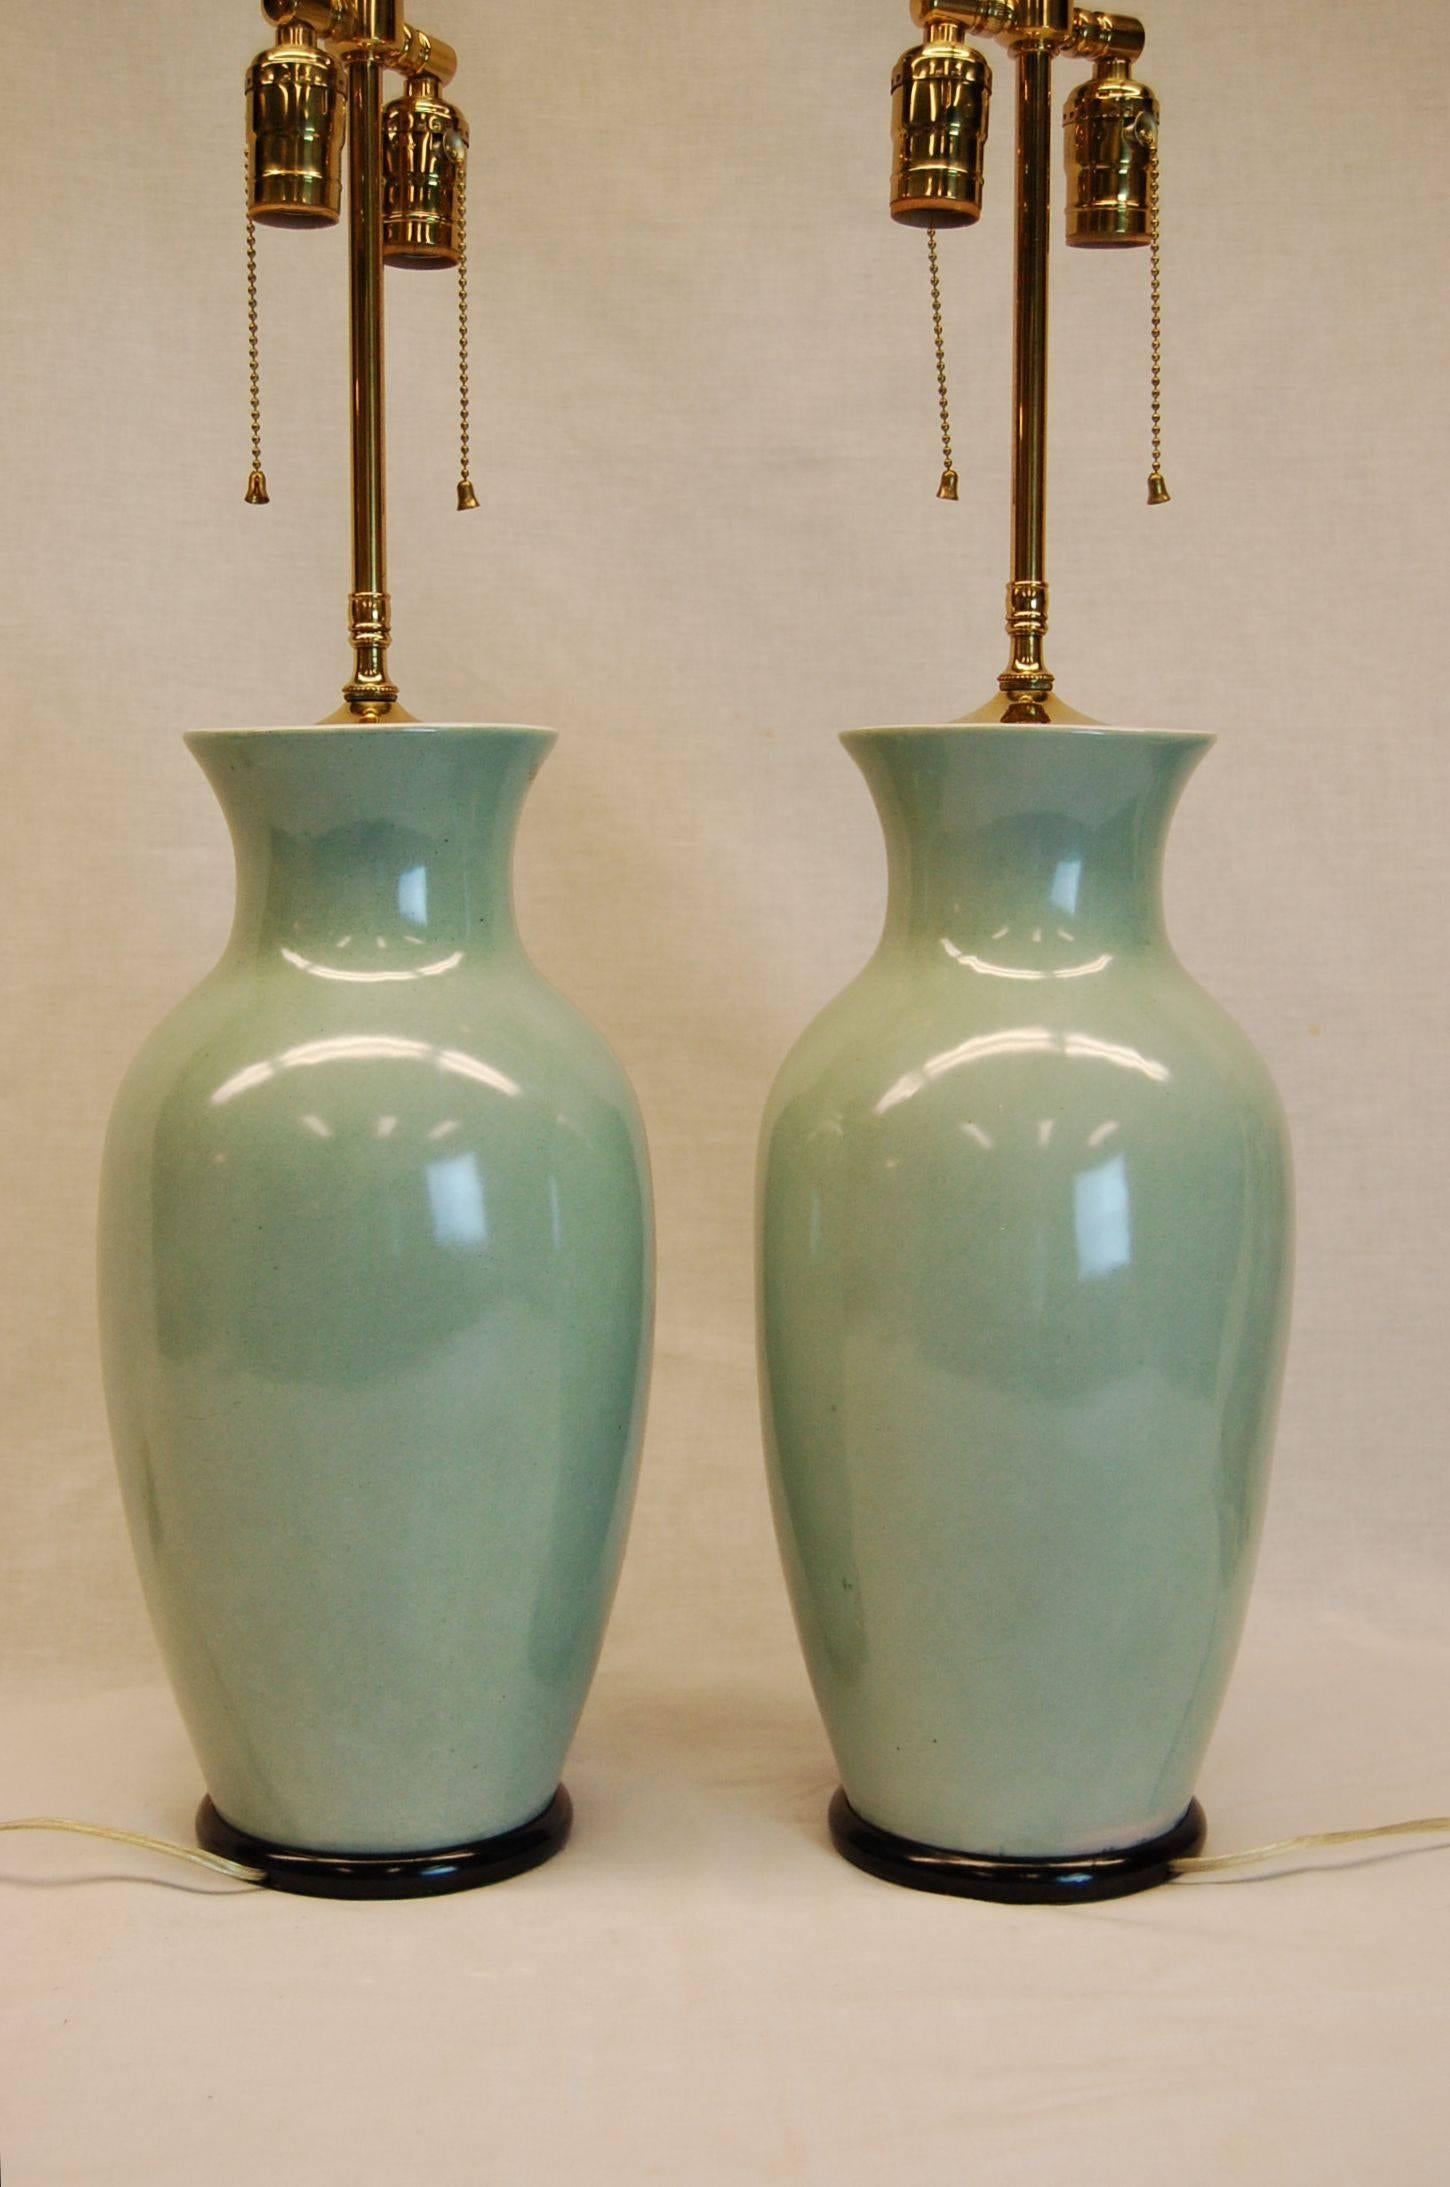 Pair of mint condition urns wired as lamps on wooden bases, wired with three way sockets. 16